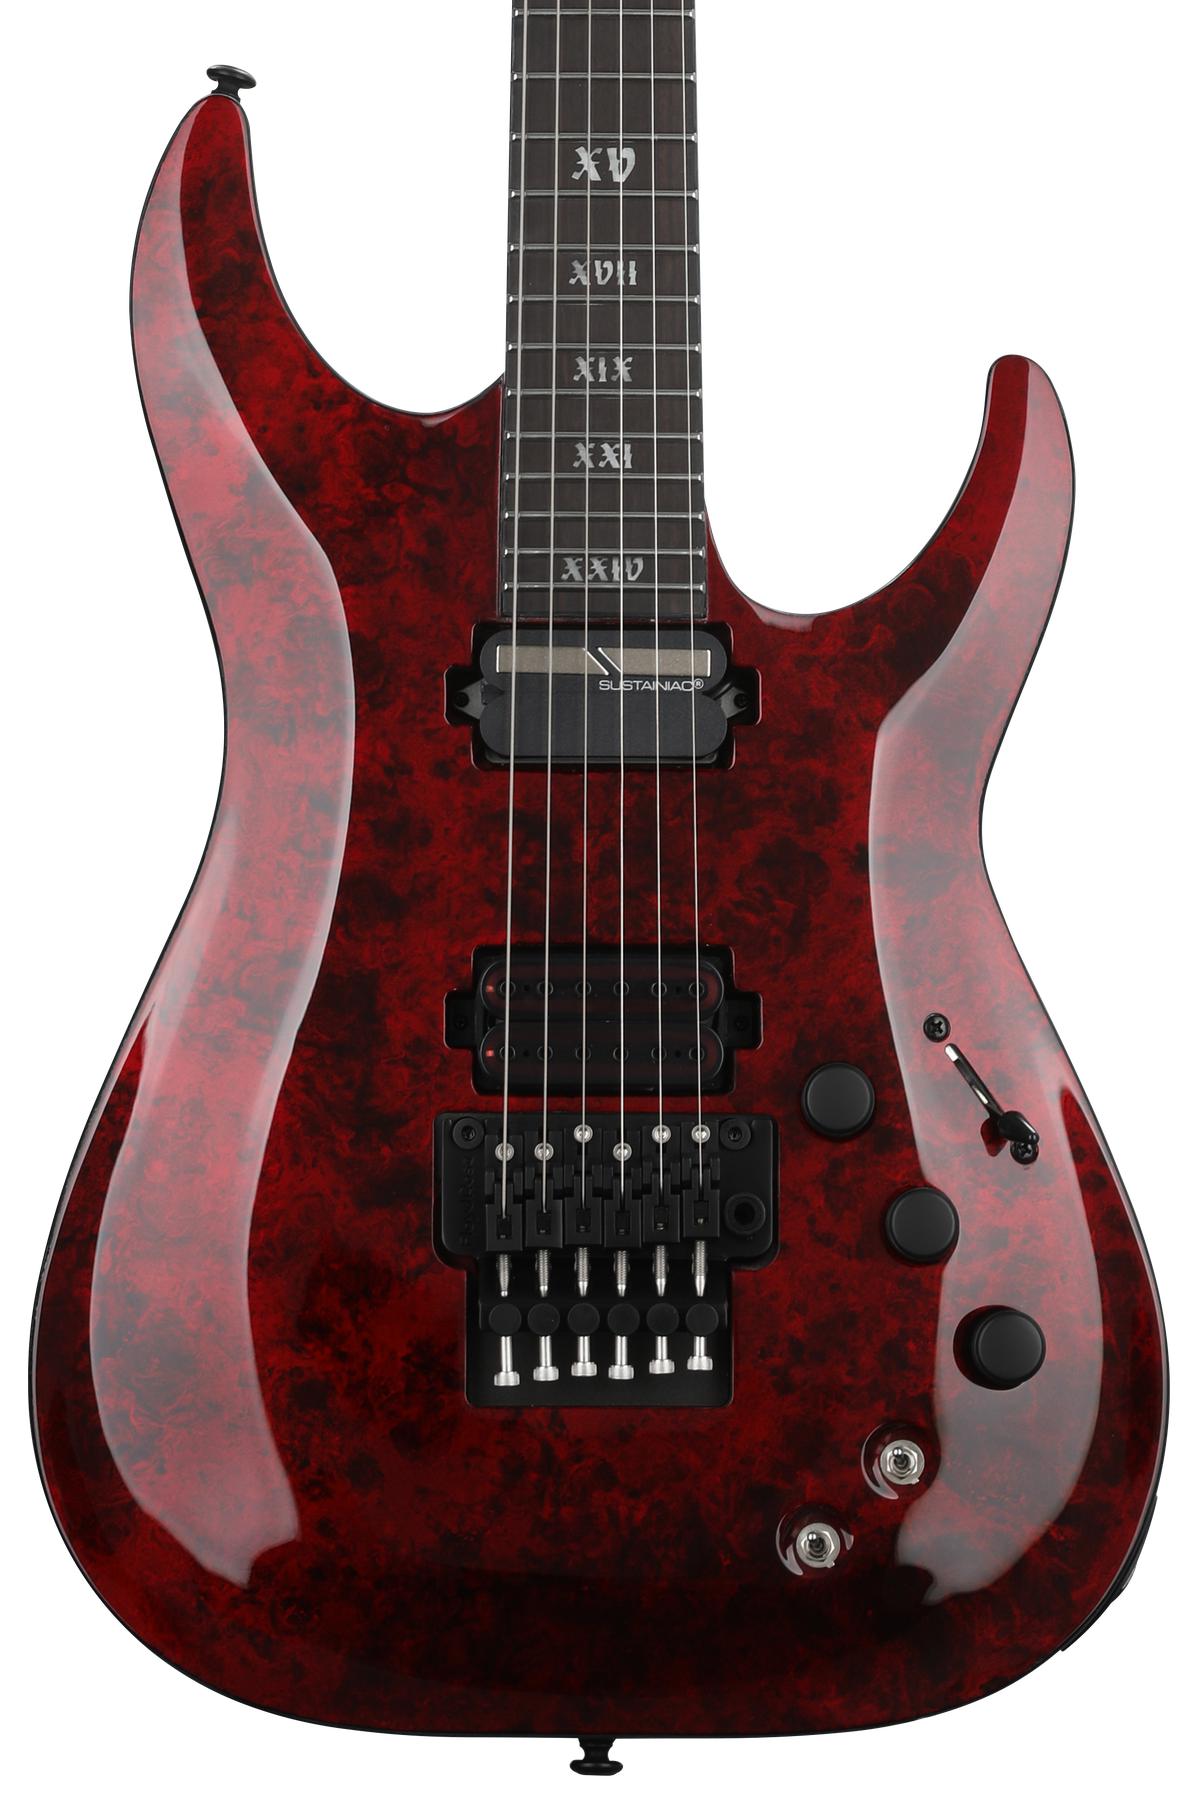 Schecter C-1 FR-S Apocalypse Electric Guitar - Red Reign